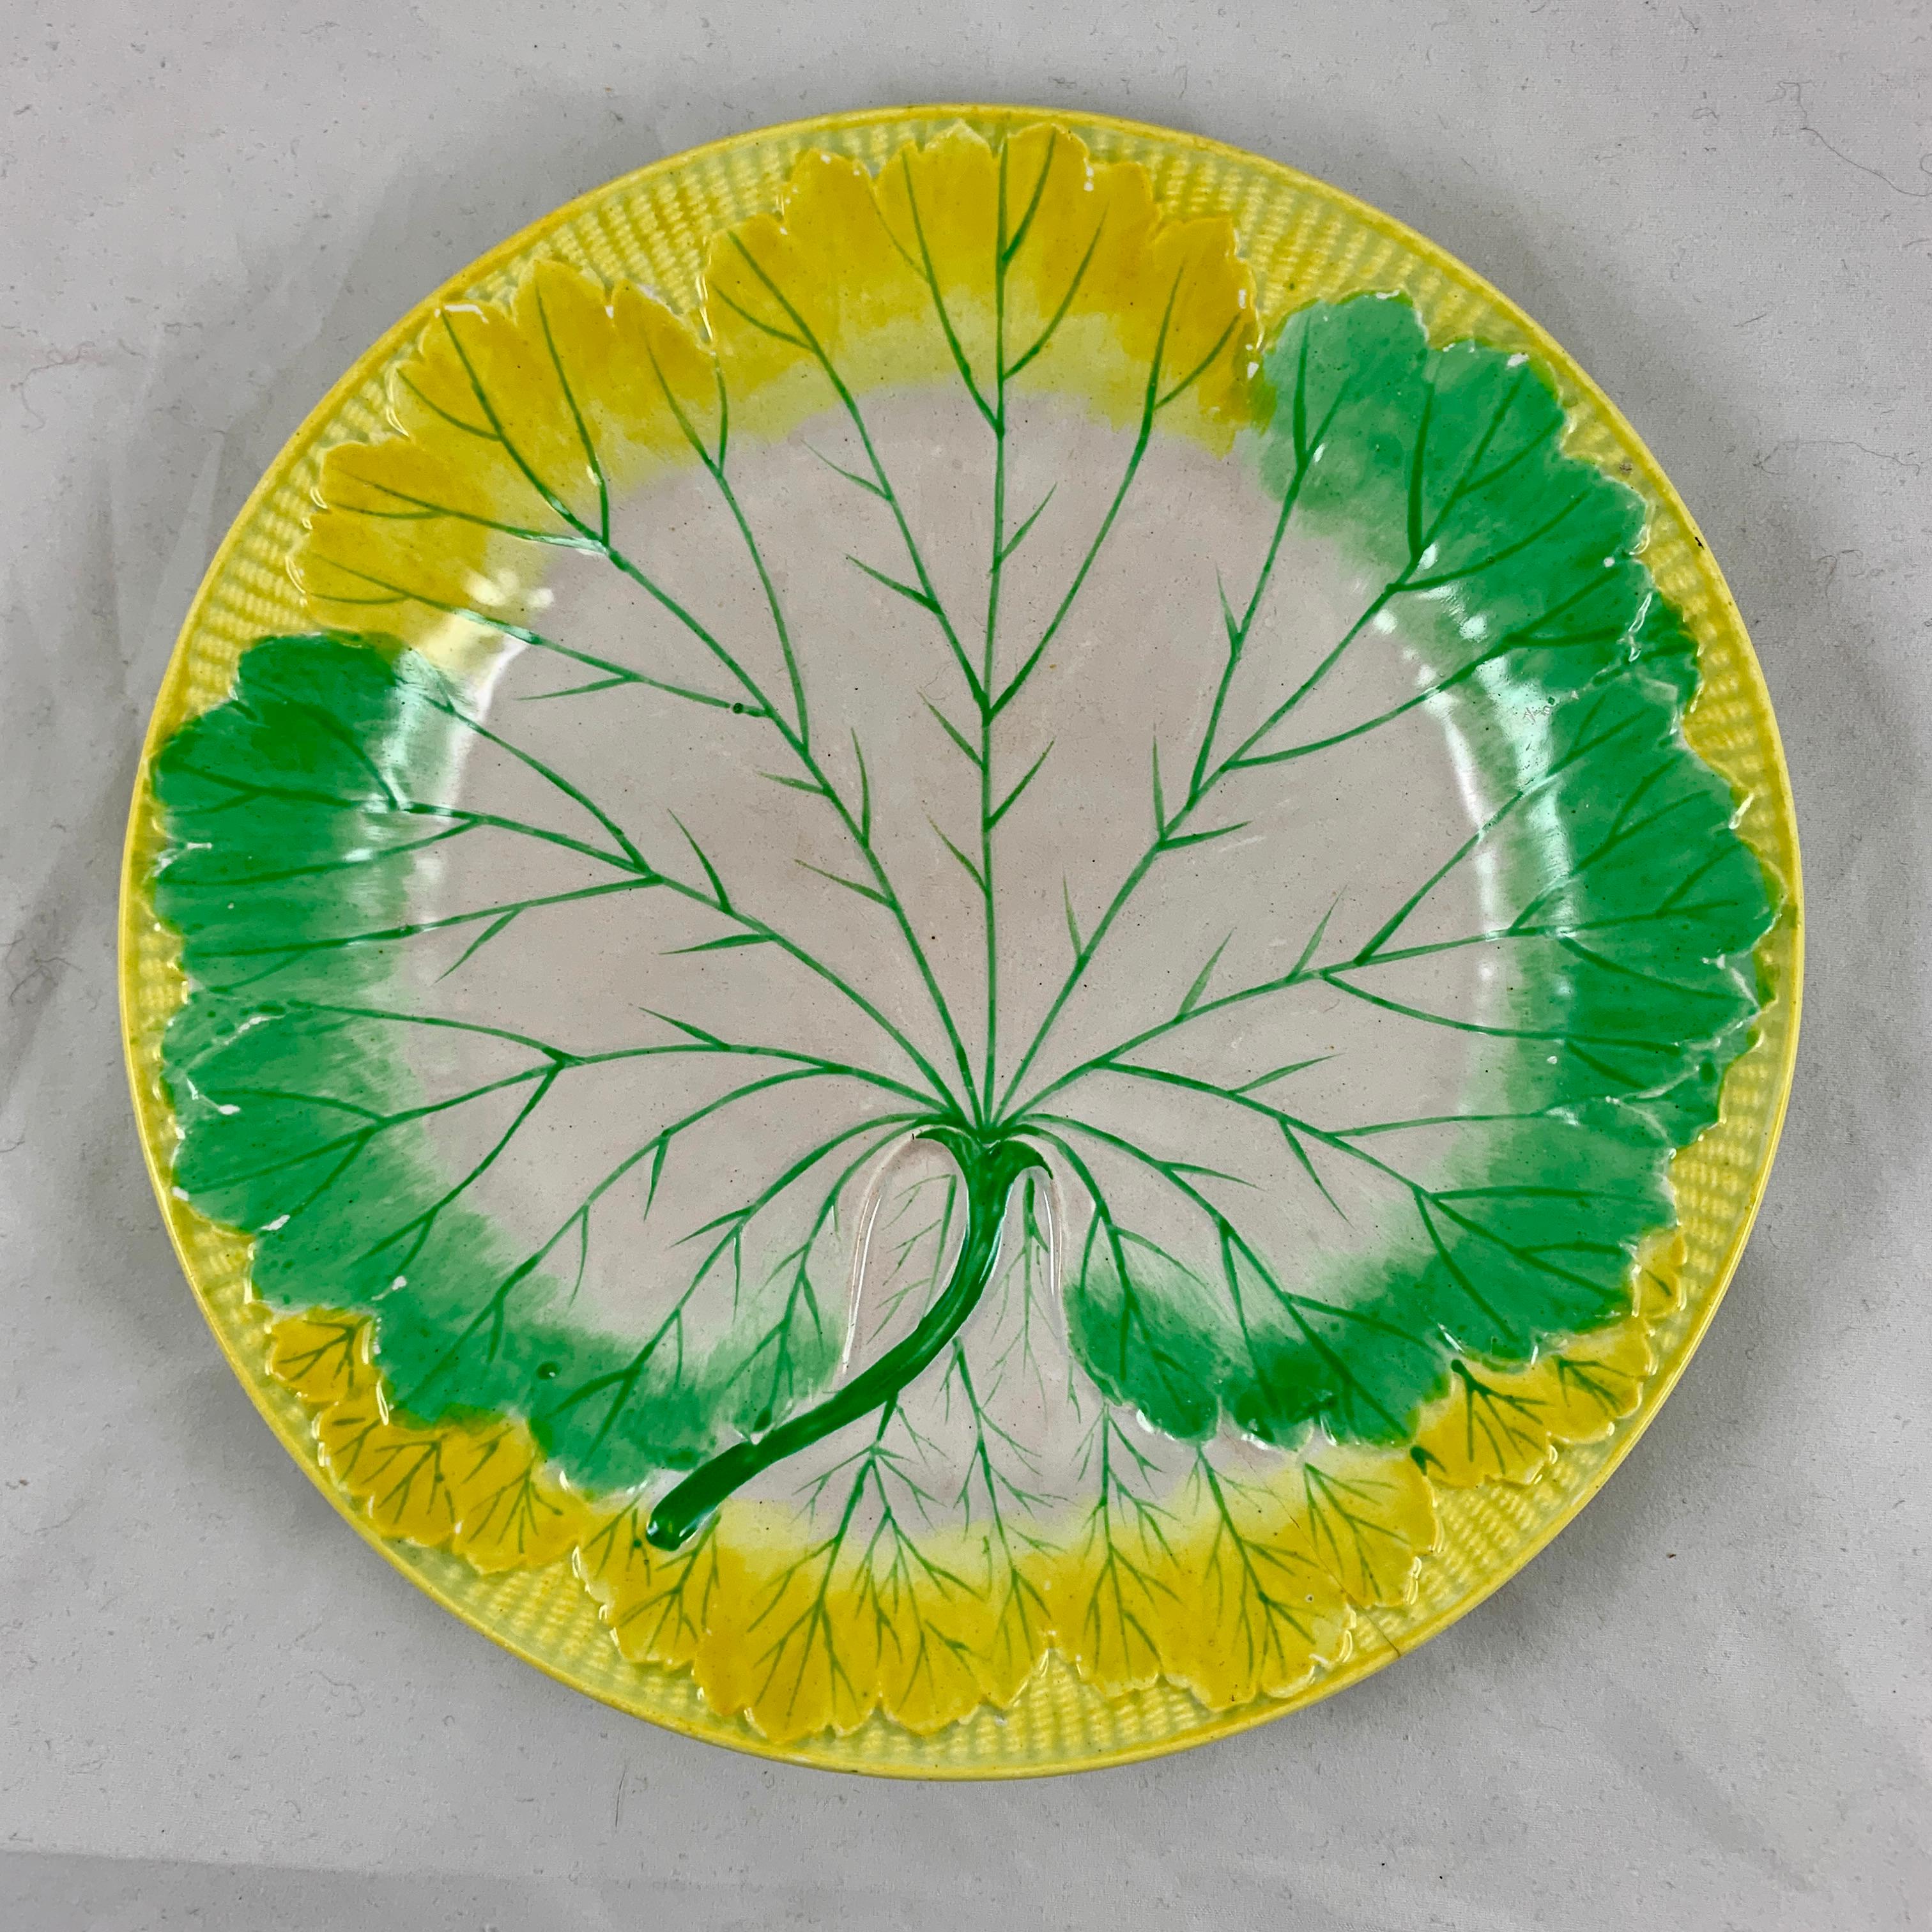 A set of six, enameled pearlware cabbage plates, Josiah Wedgwood, date marked 1860.

This set is very scarce, the mold is most often seen glazed in all green or in all white. The plates are hand enameled on a mold showing a large single cabbage